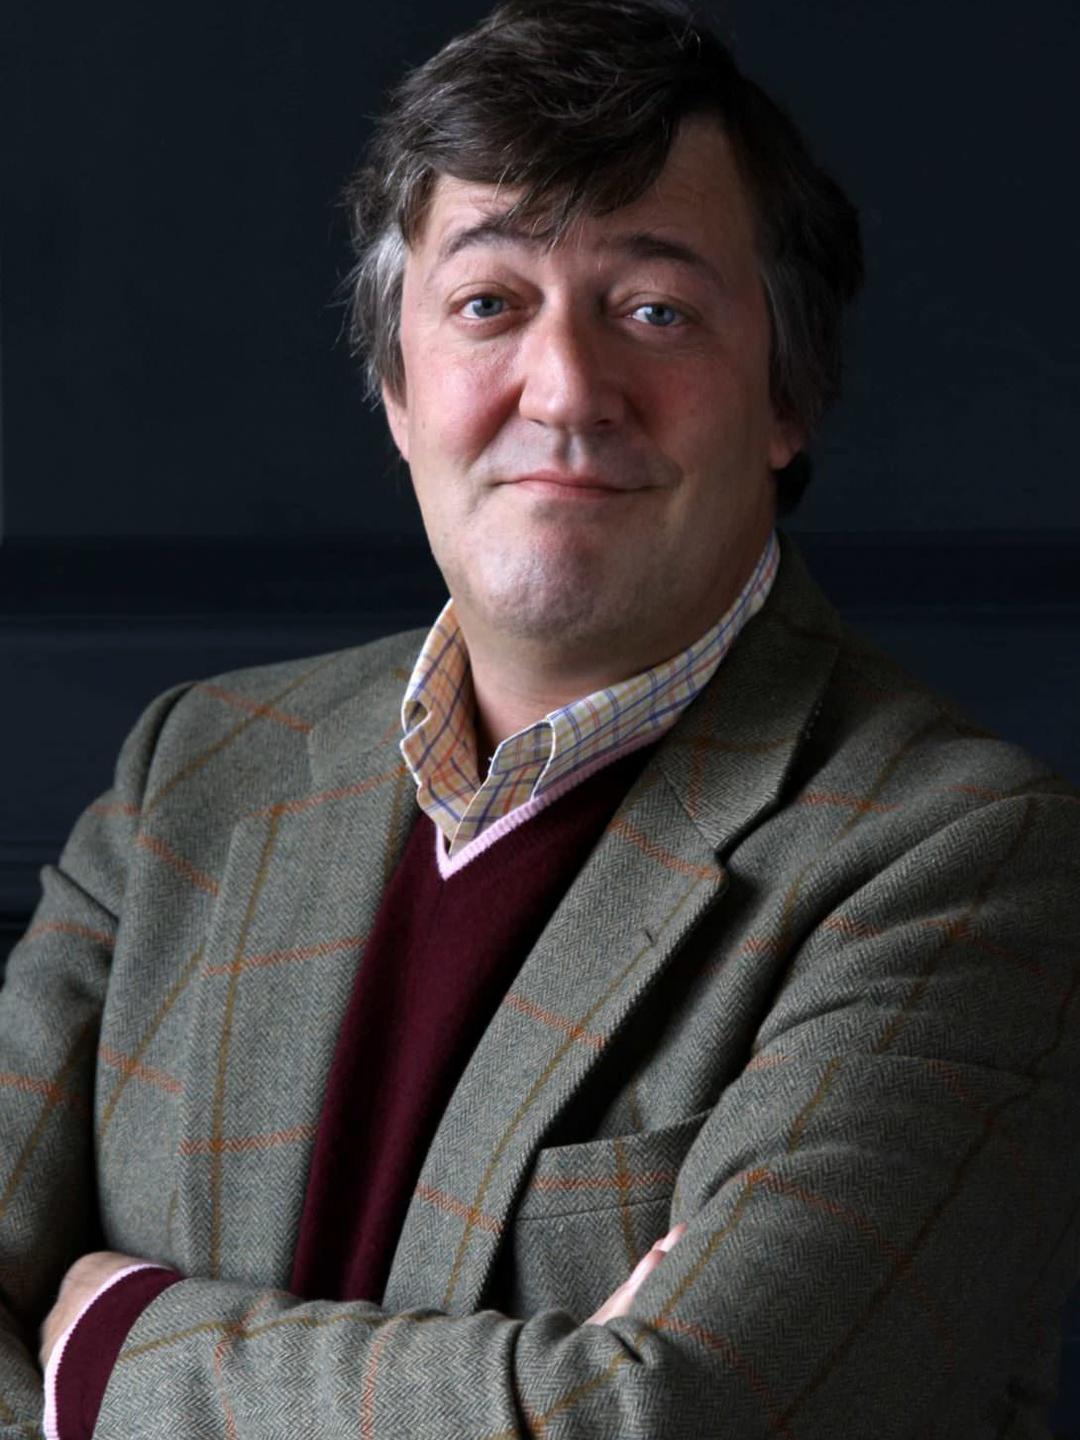 Stephen Fry young age